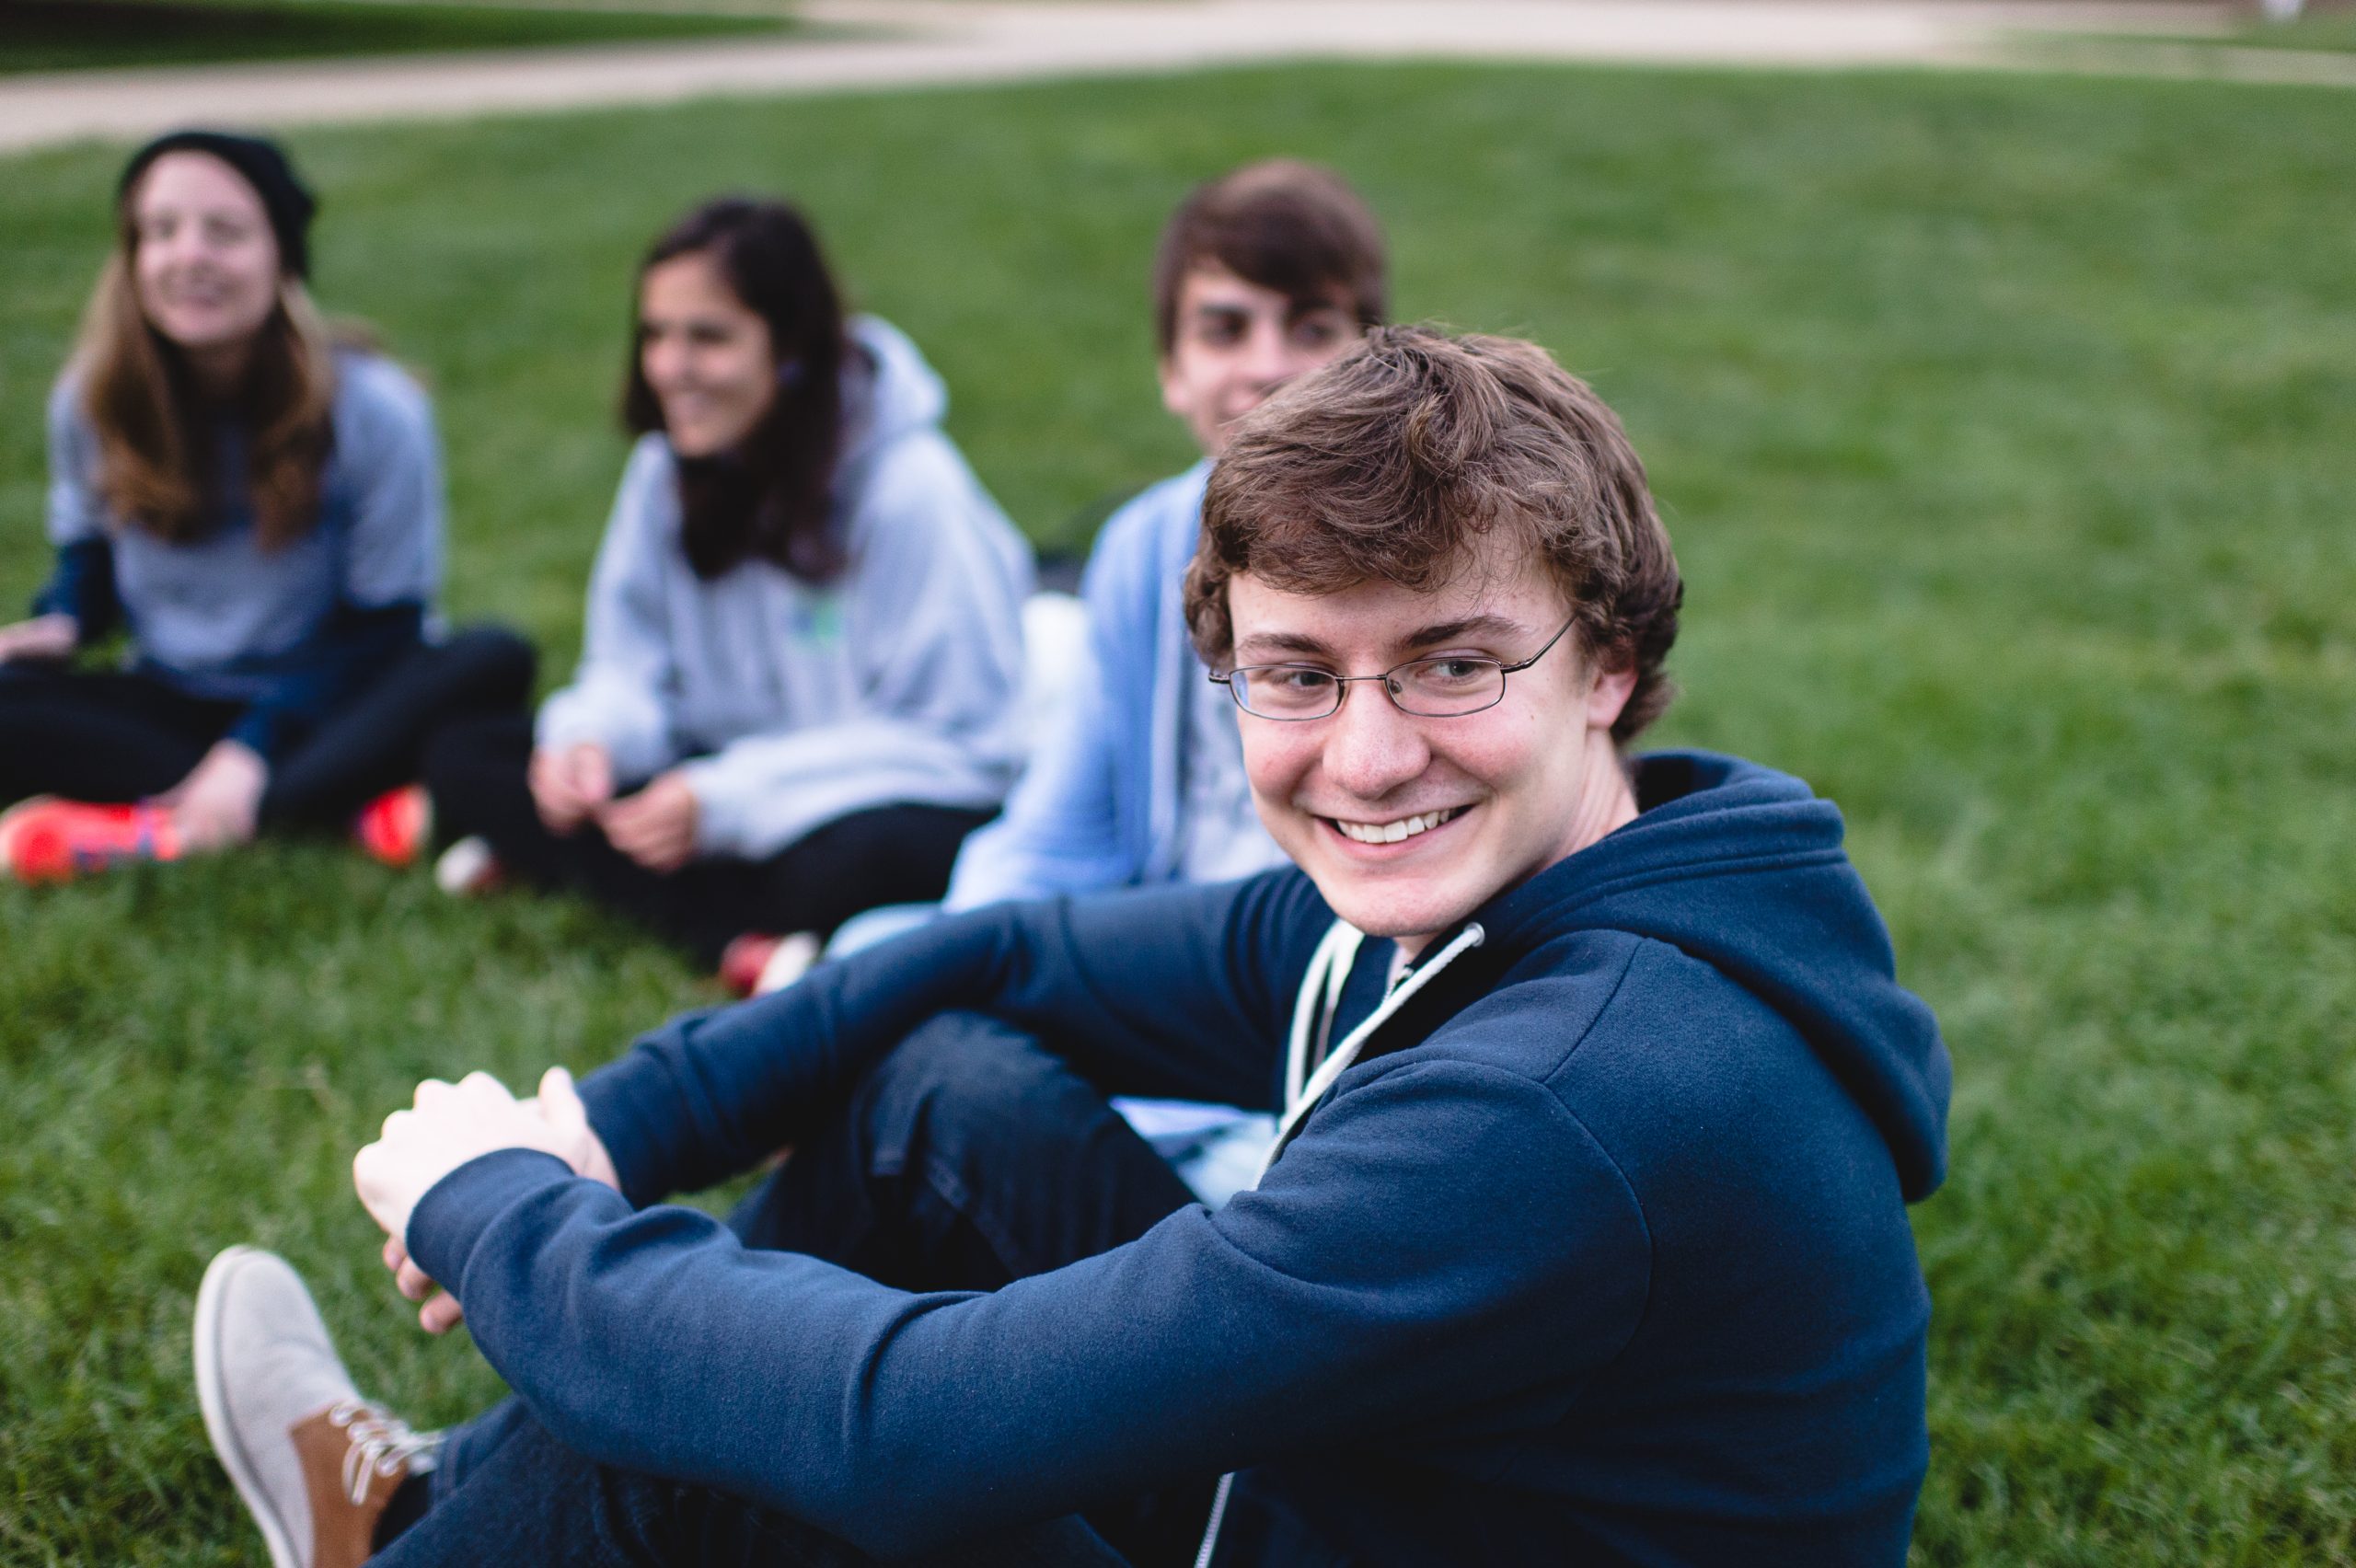 Students sitting on the quad in the grass